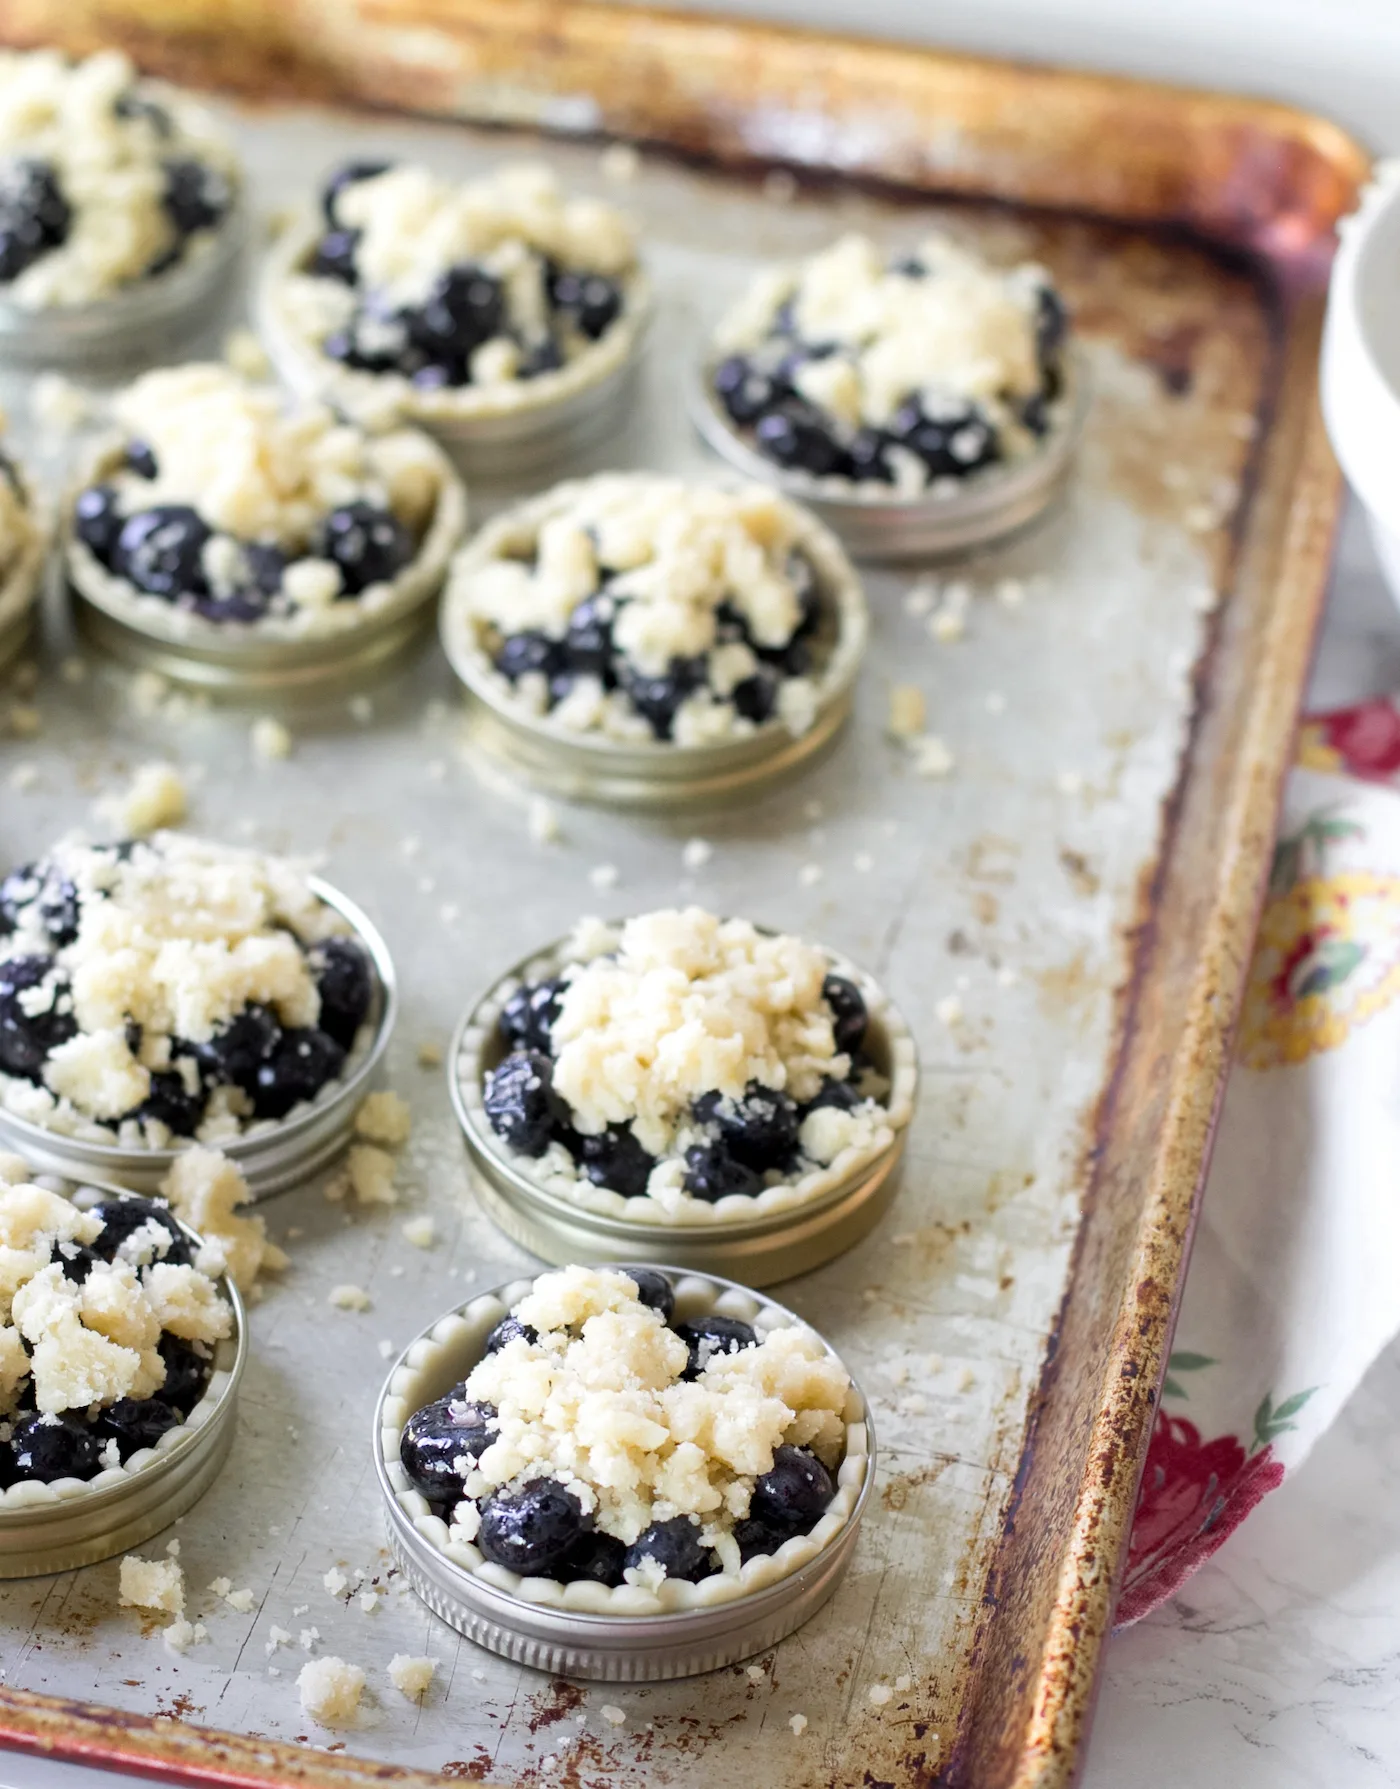 Topping the blueberries with crumble